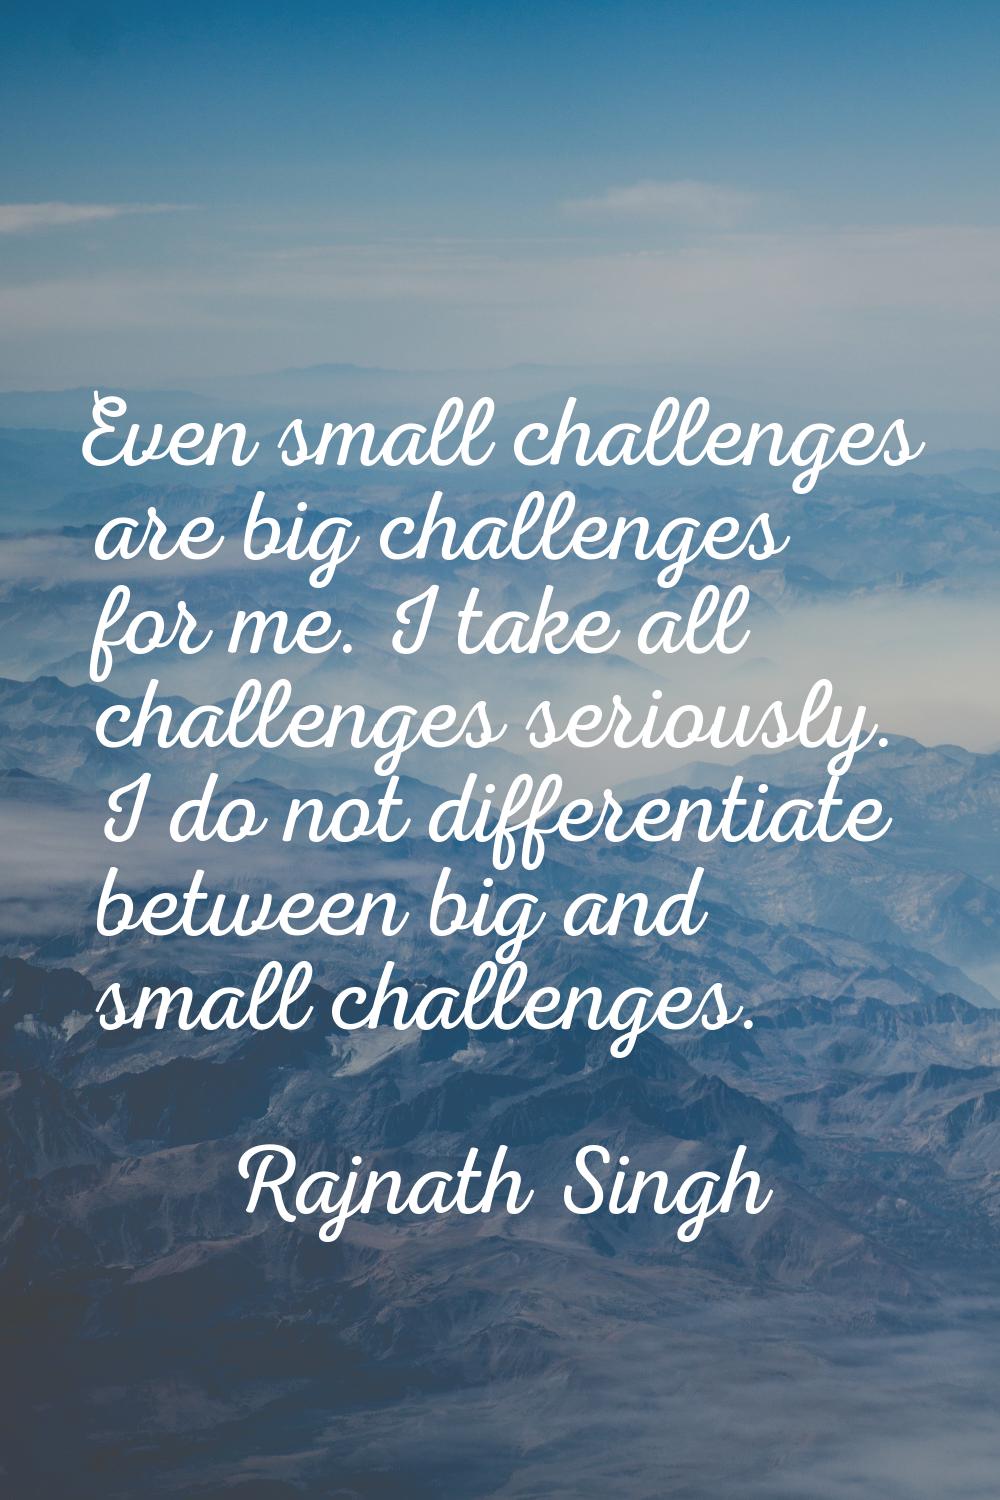 Even small challenges are big challenges for me. I take all challenges seriously. I do not differen